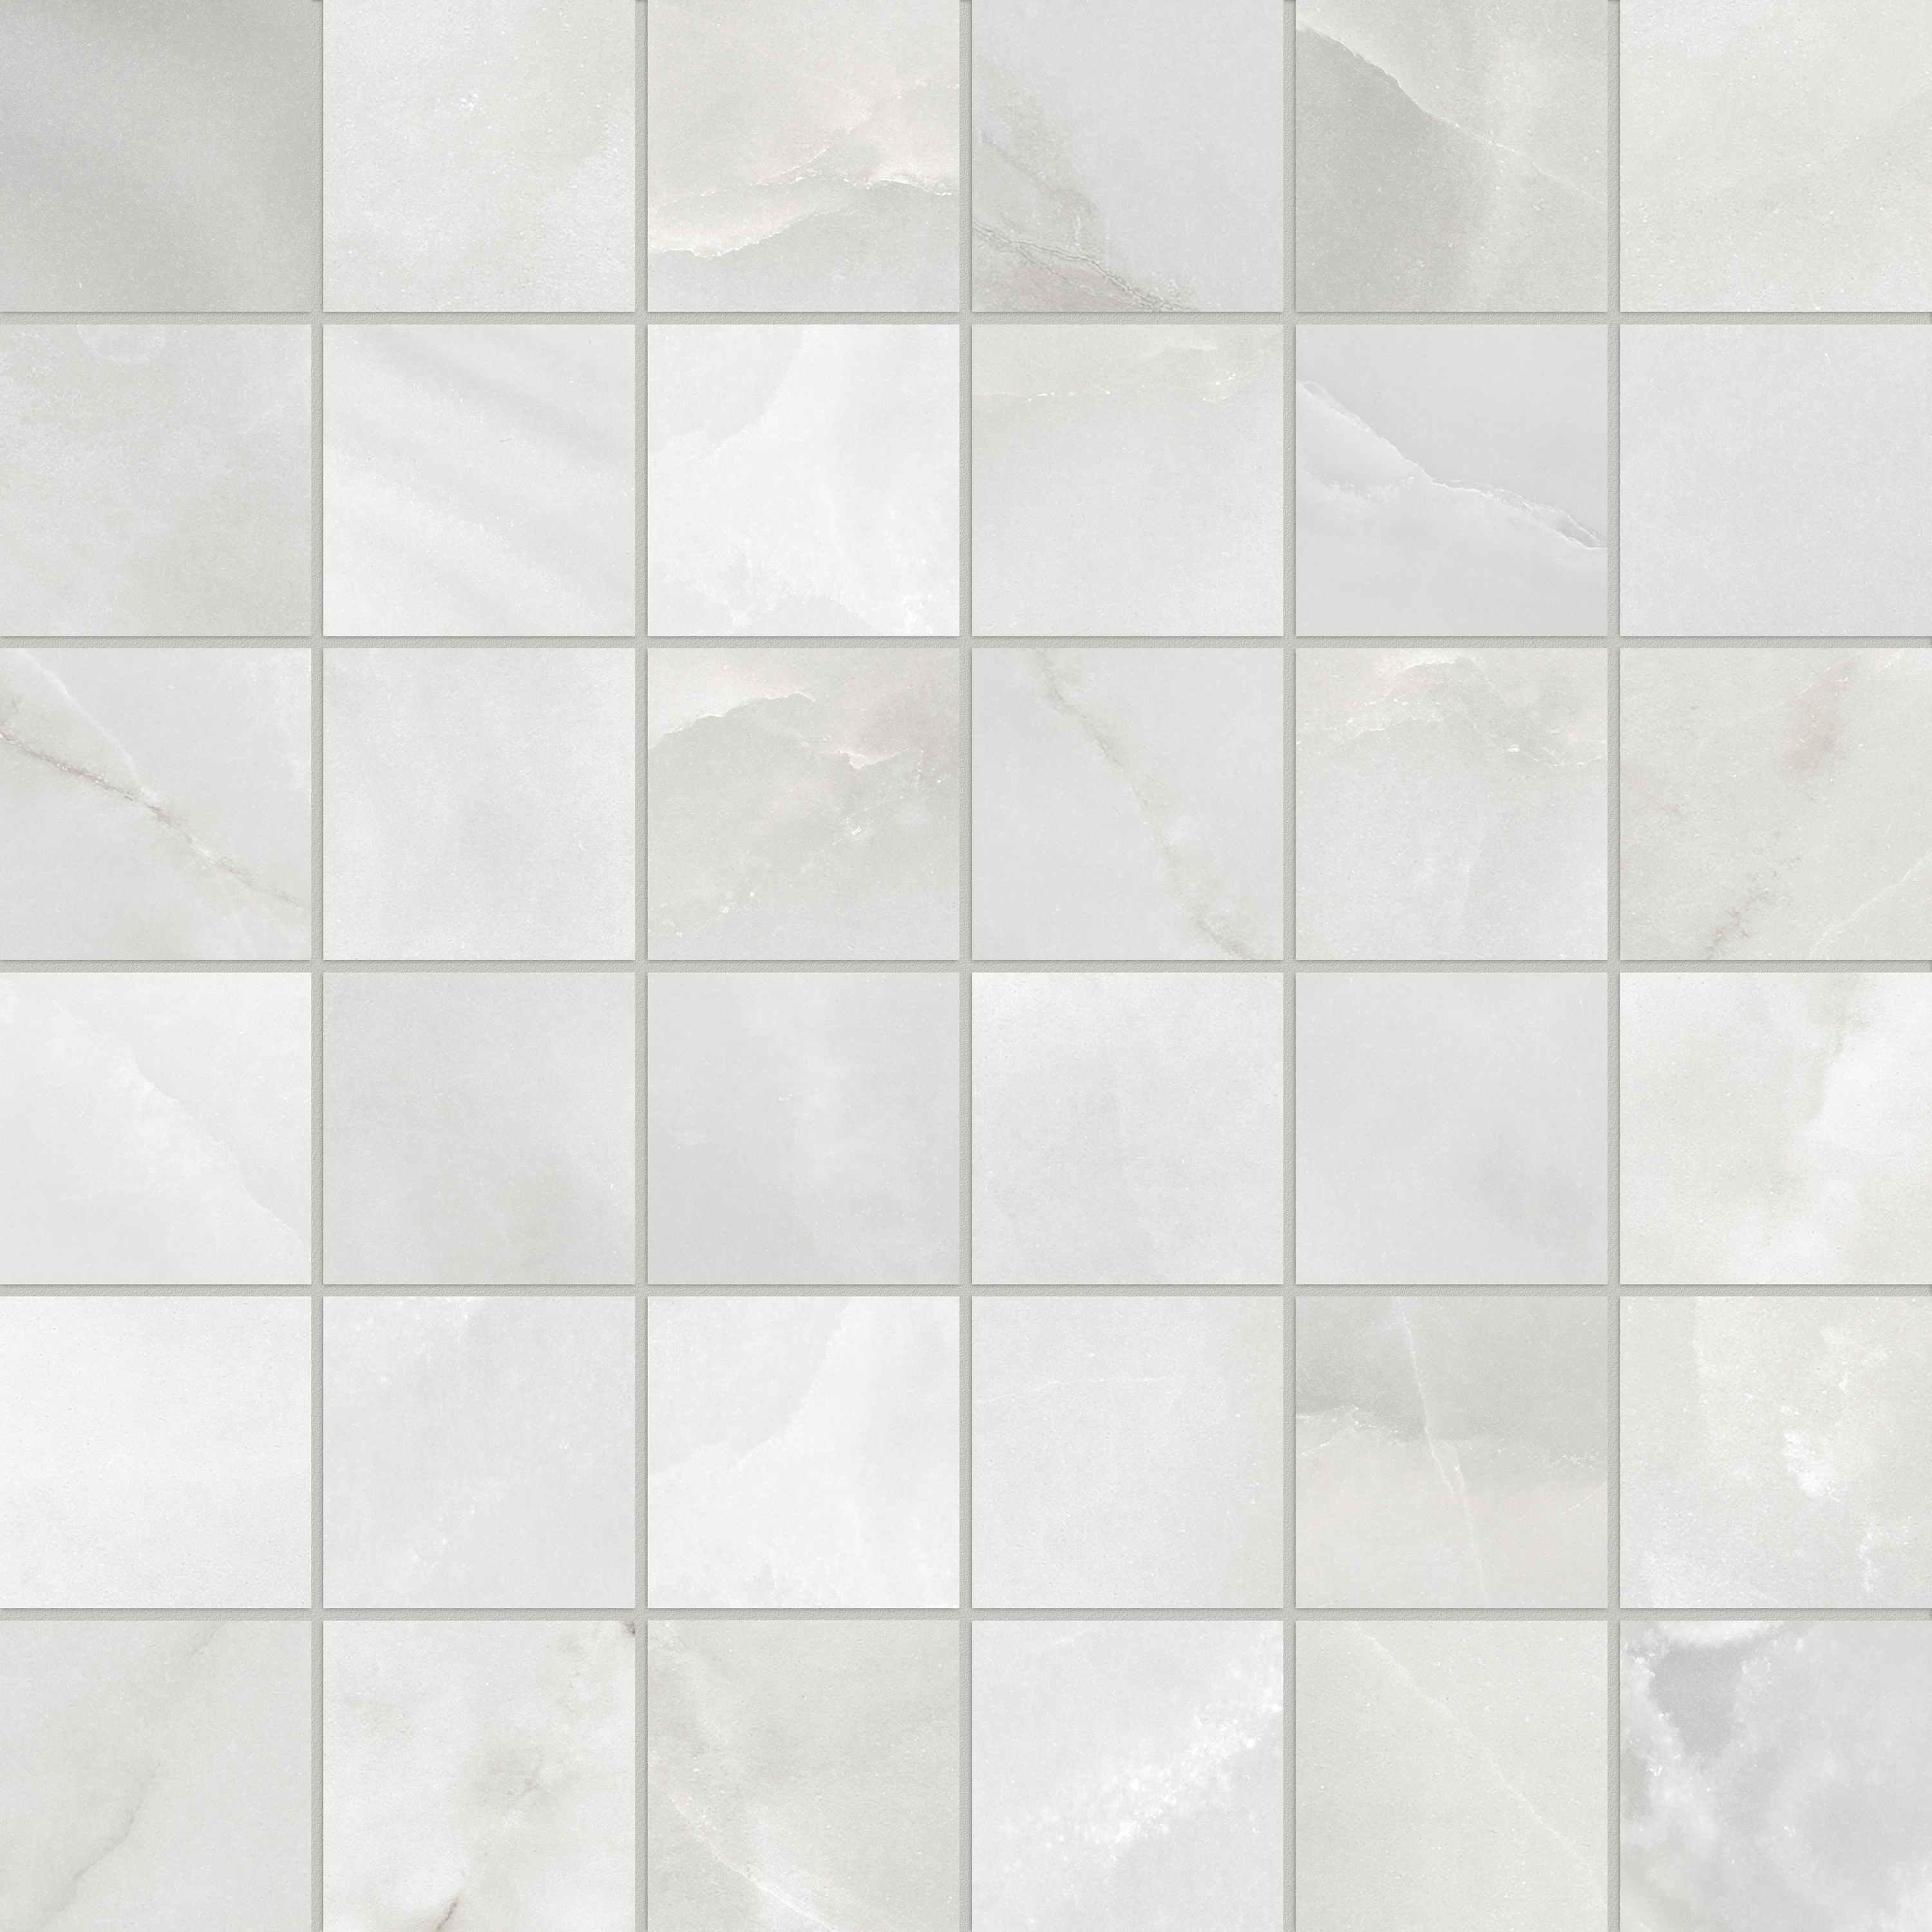 onyx nuvolato straight stack 2x2-inch pattern glazed porcelain mosaic from la marca anatolia collection distributed by surface group international honed finish straight edge edge mesh shape